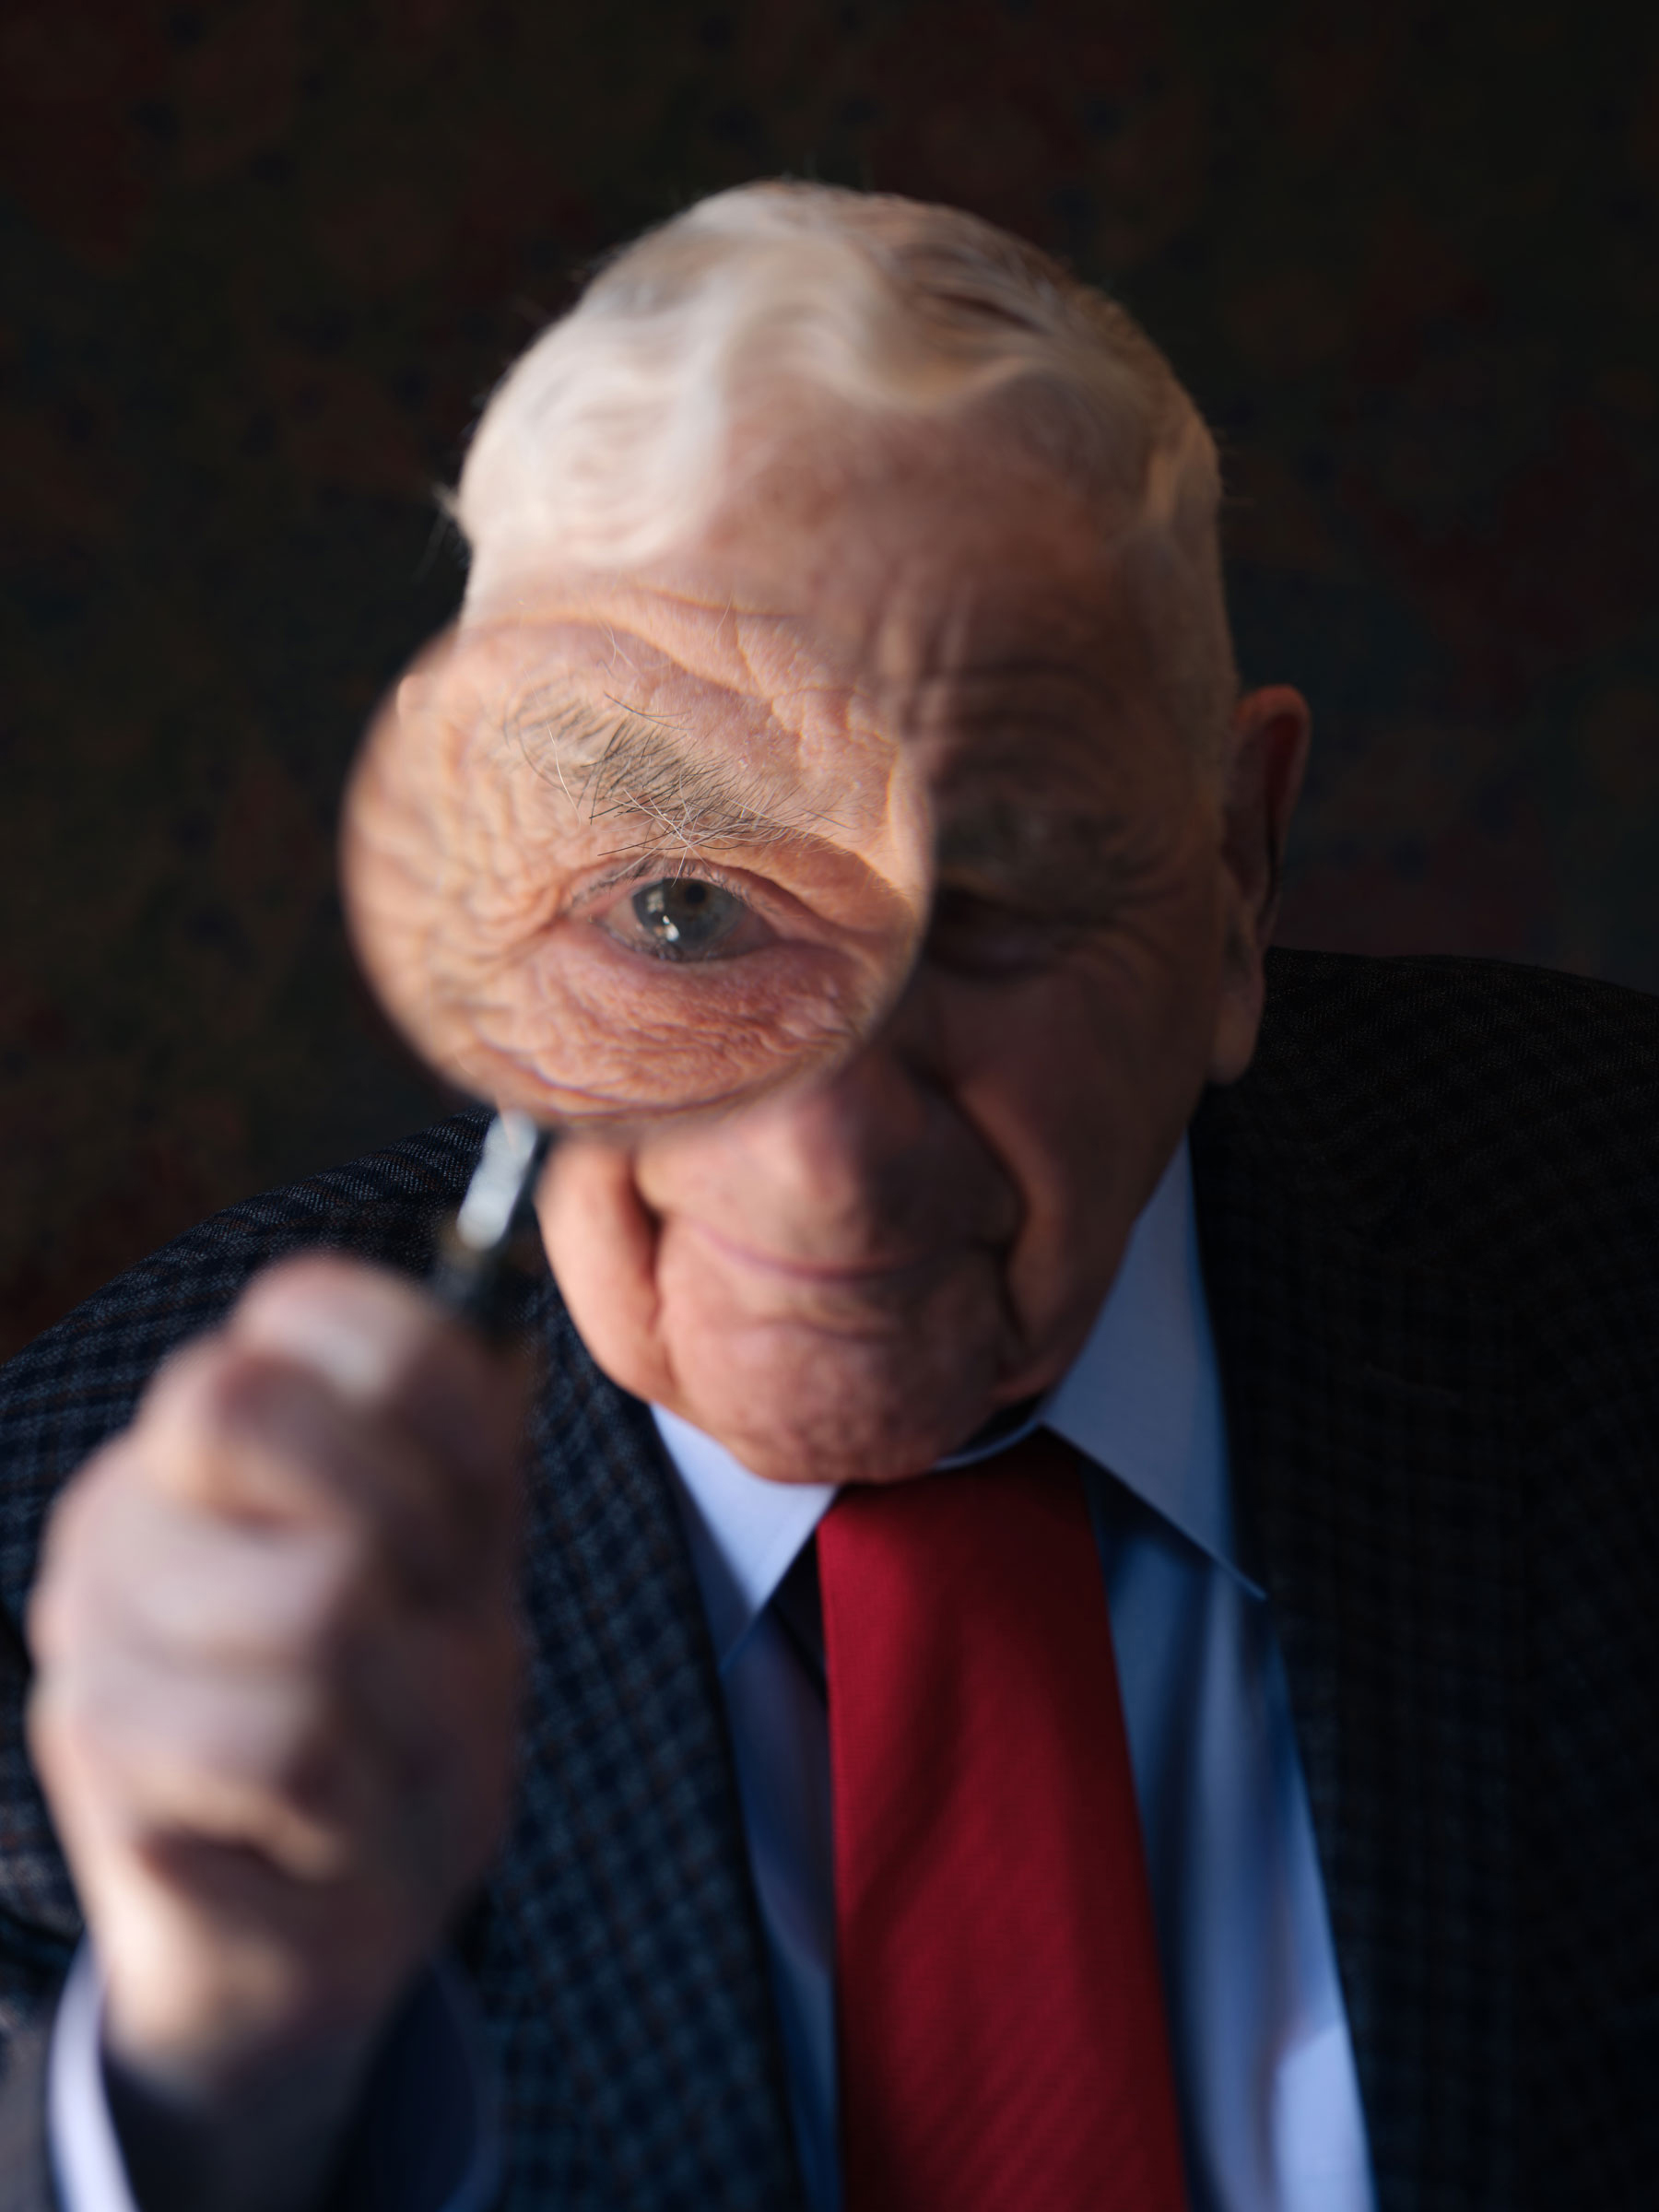 <strong>Dr. Werner Spitz, photographed in St. Clair Shores, Mich., on March 29.</strong> "<a href="https://time.com/6164527/werner-spitz-forensic-pathologist/">Meet the 95-Year-Old ‘Medical Detective’ Who Has Examined Famous Cases From JFK to JonBenet Ramsey,</a>" April 13. (Jarod Lew for TIME)